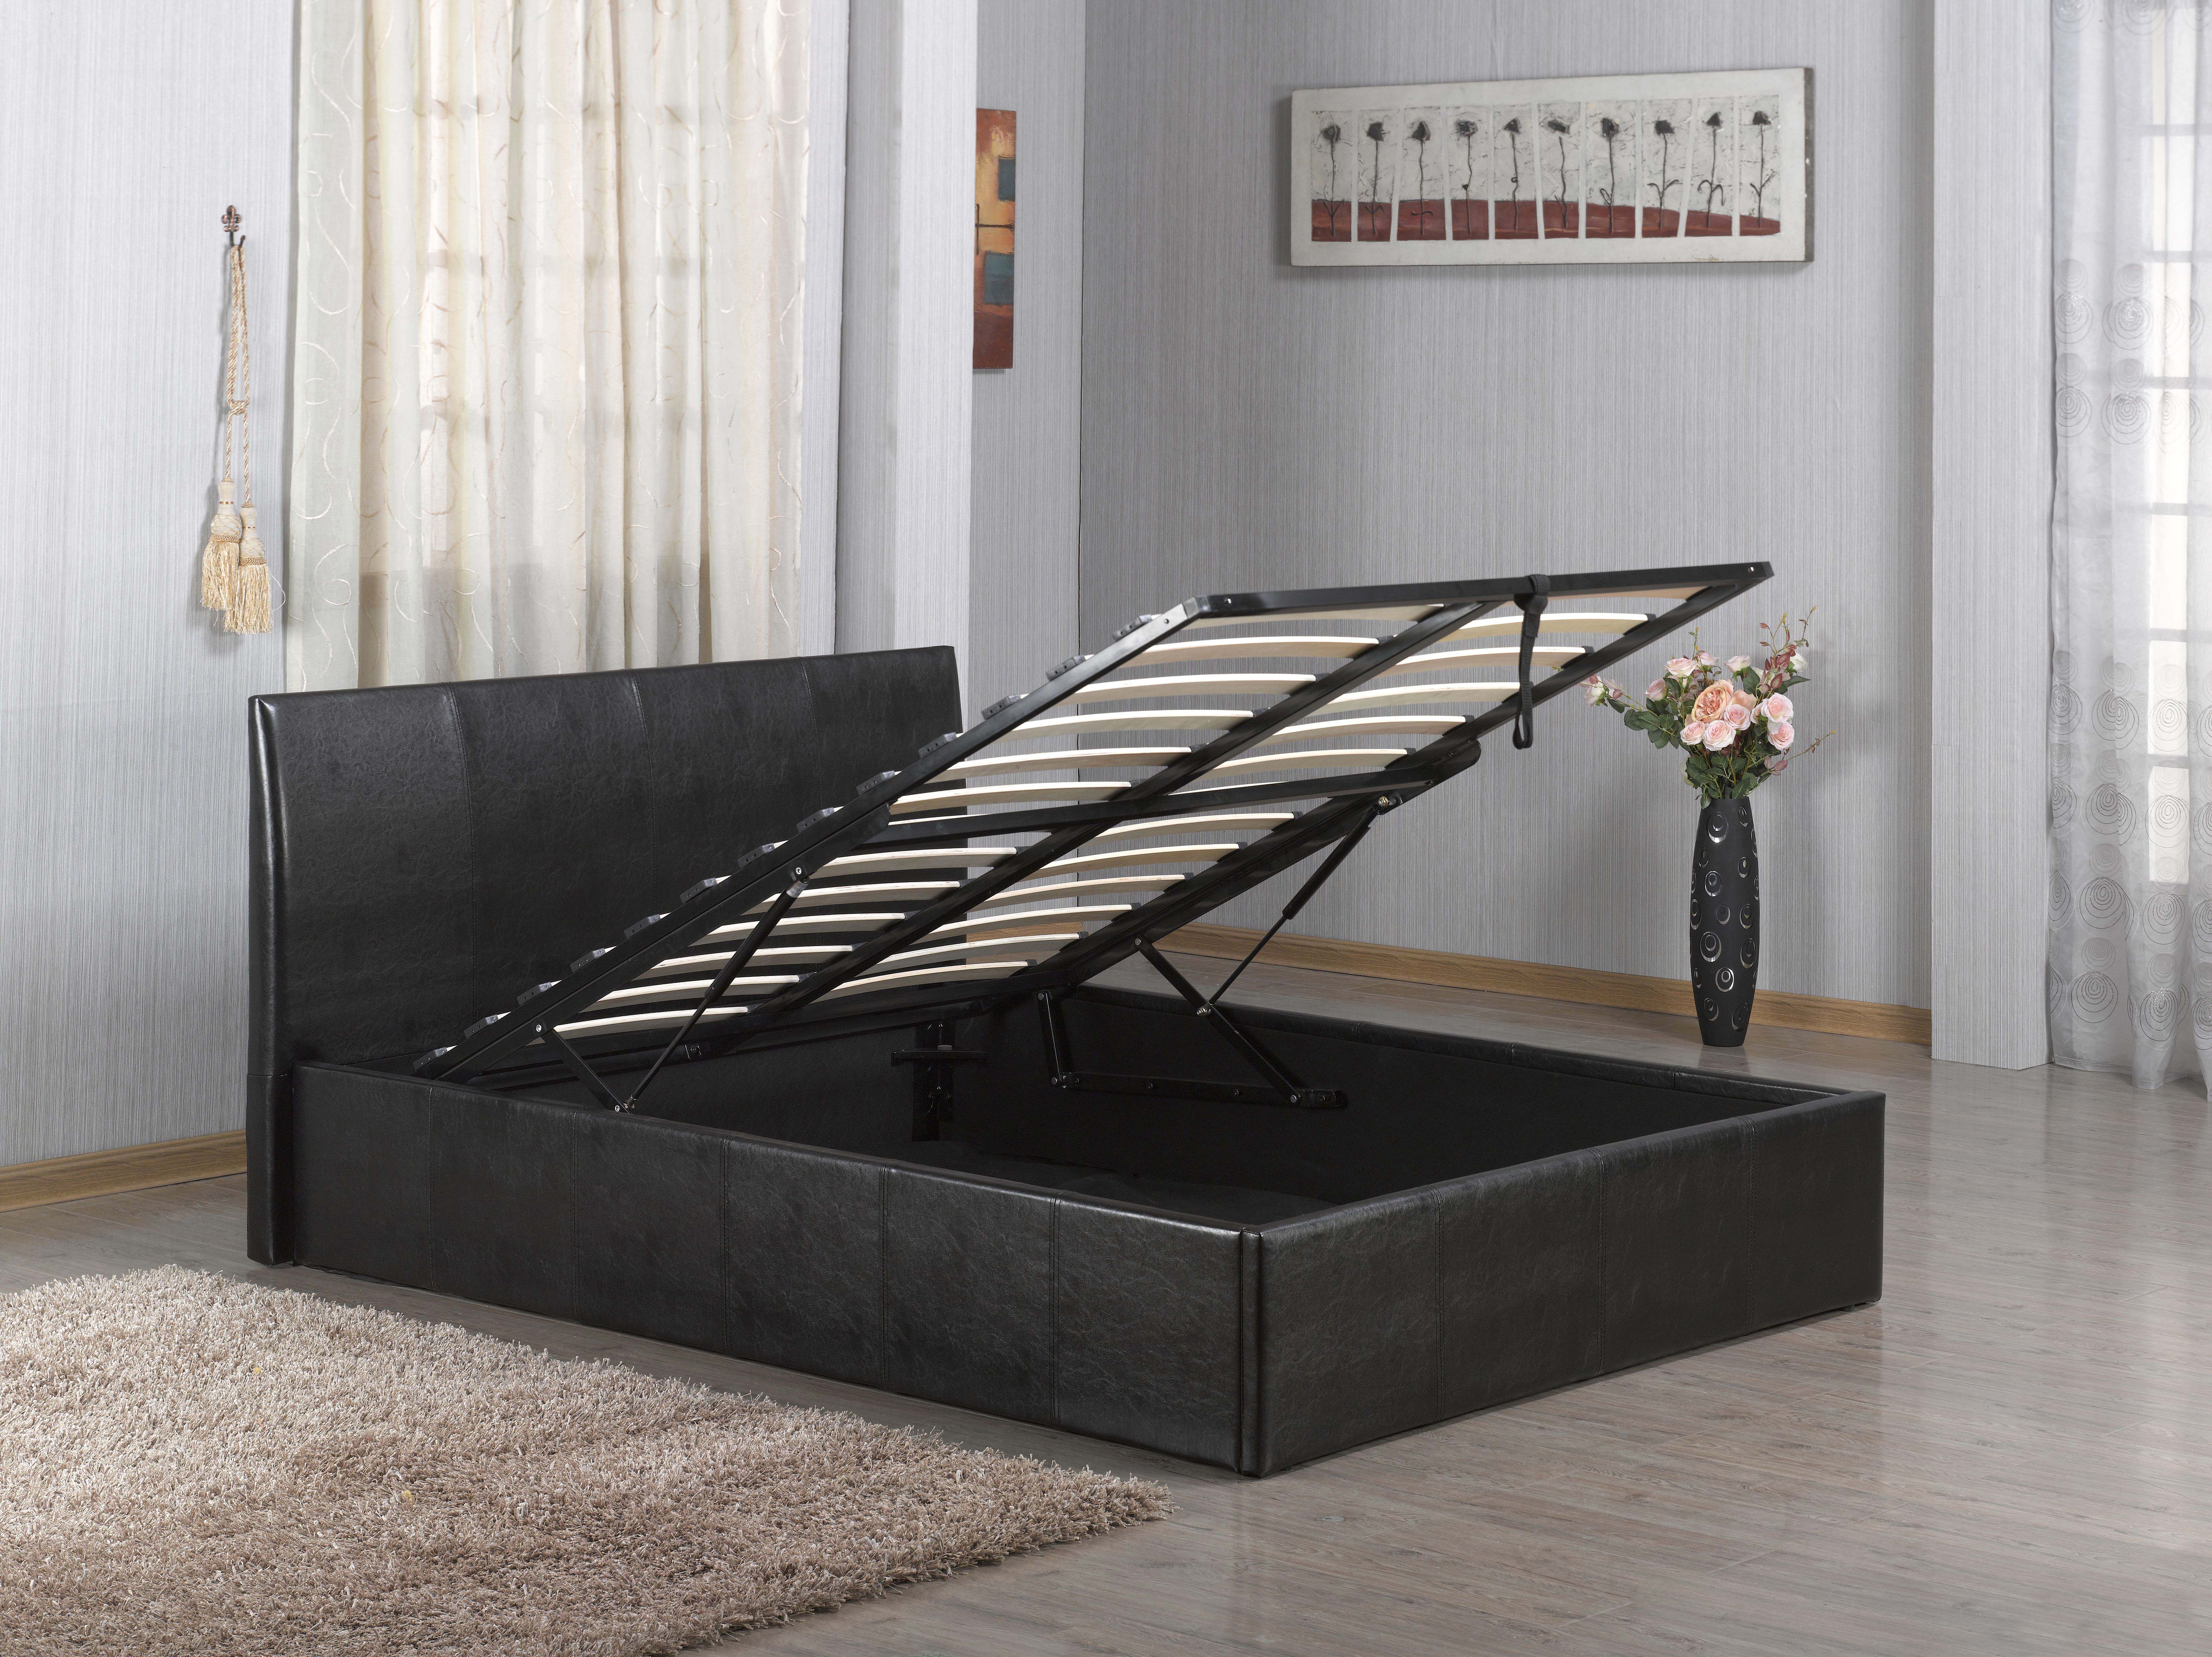 W7 Ottoman Leather Storage Bed, Leather Storage Beds